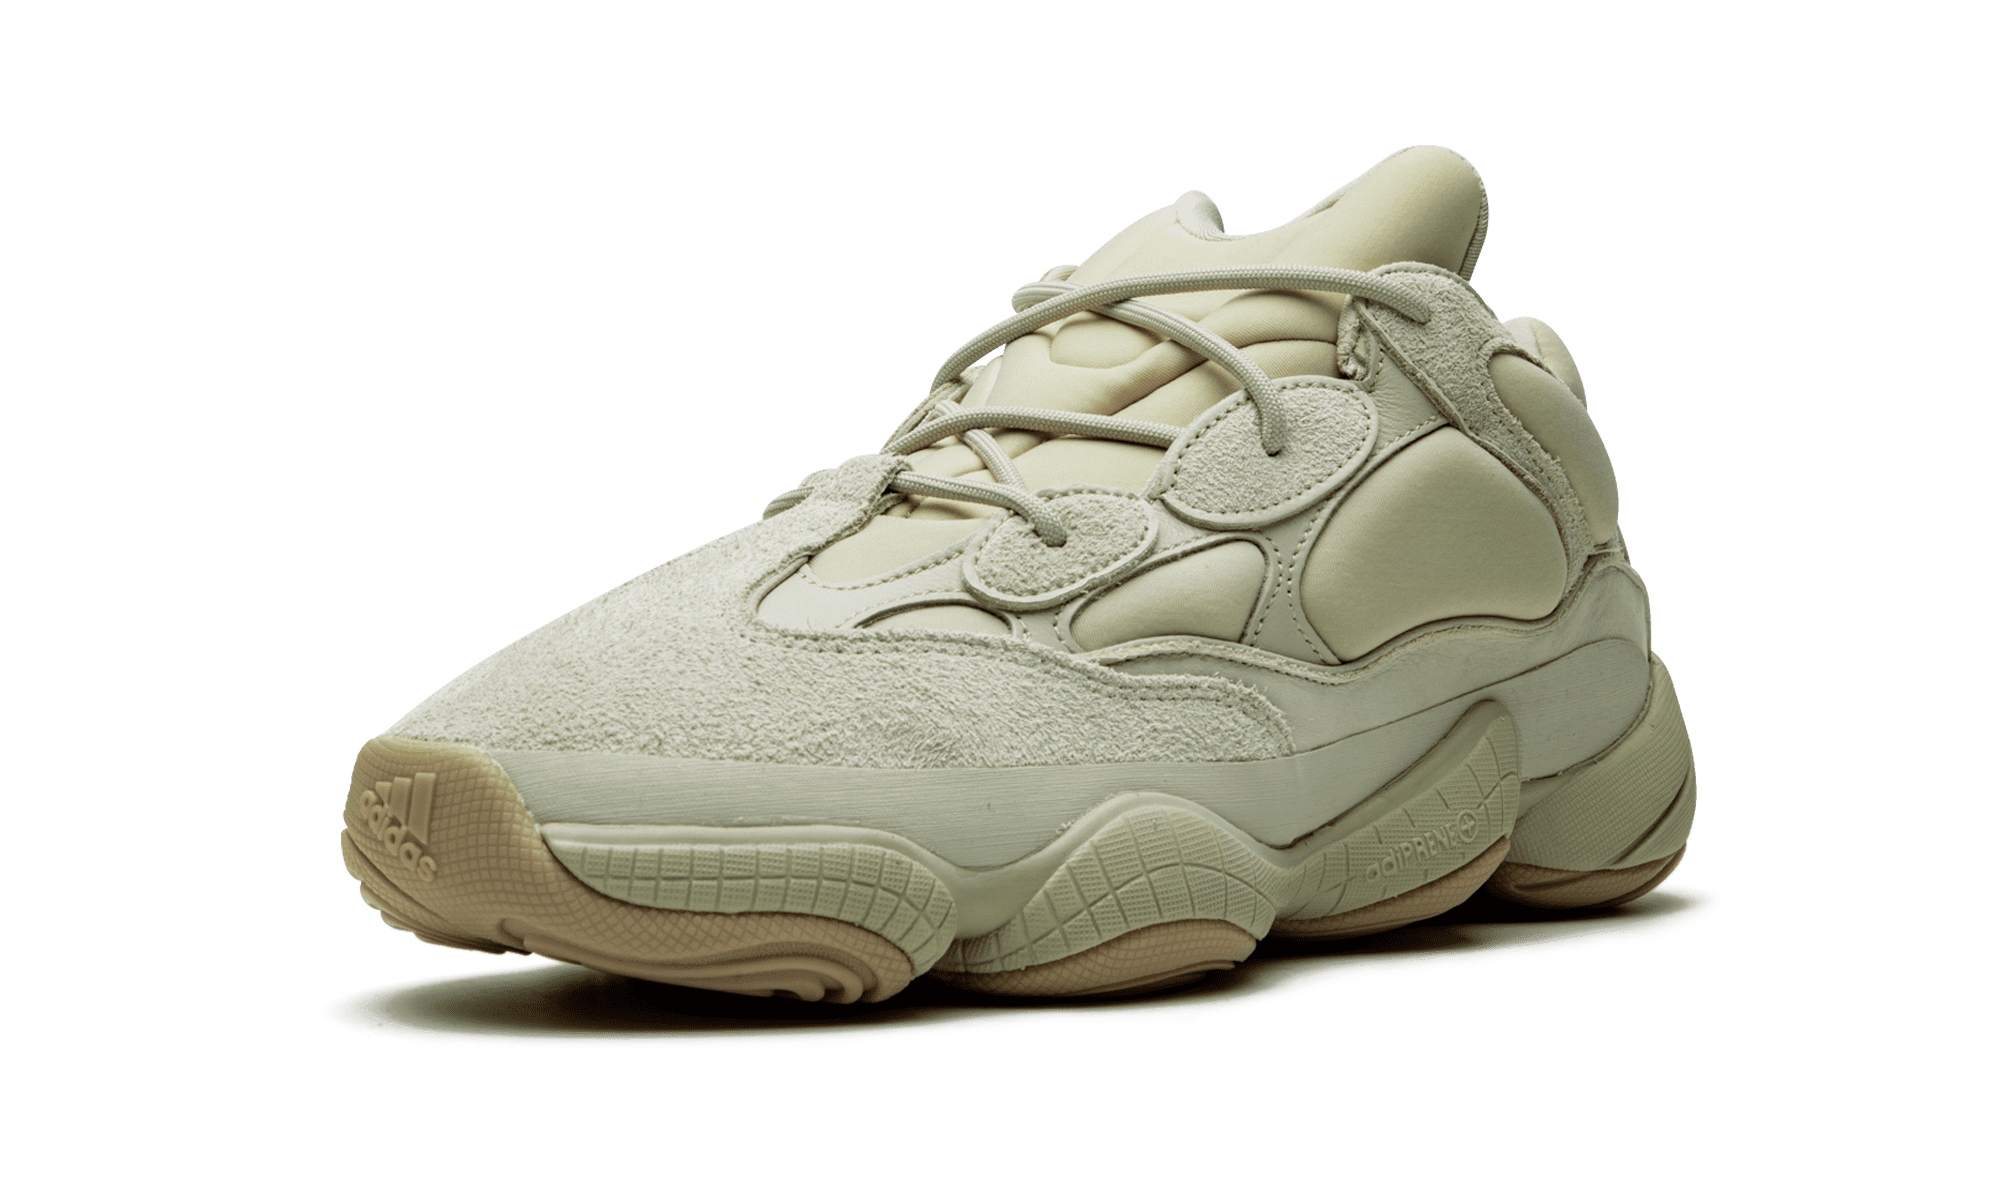 yeezy 500 stone release time